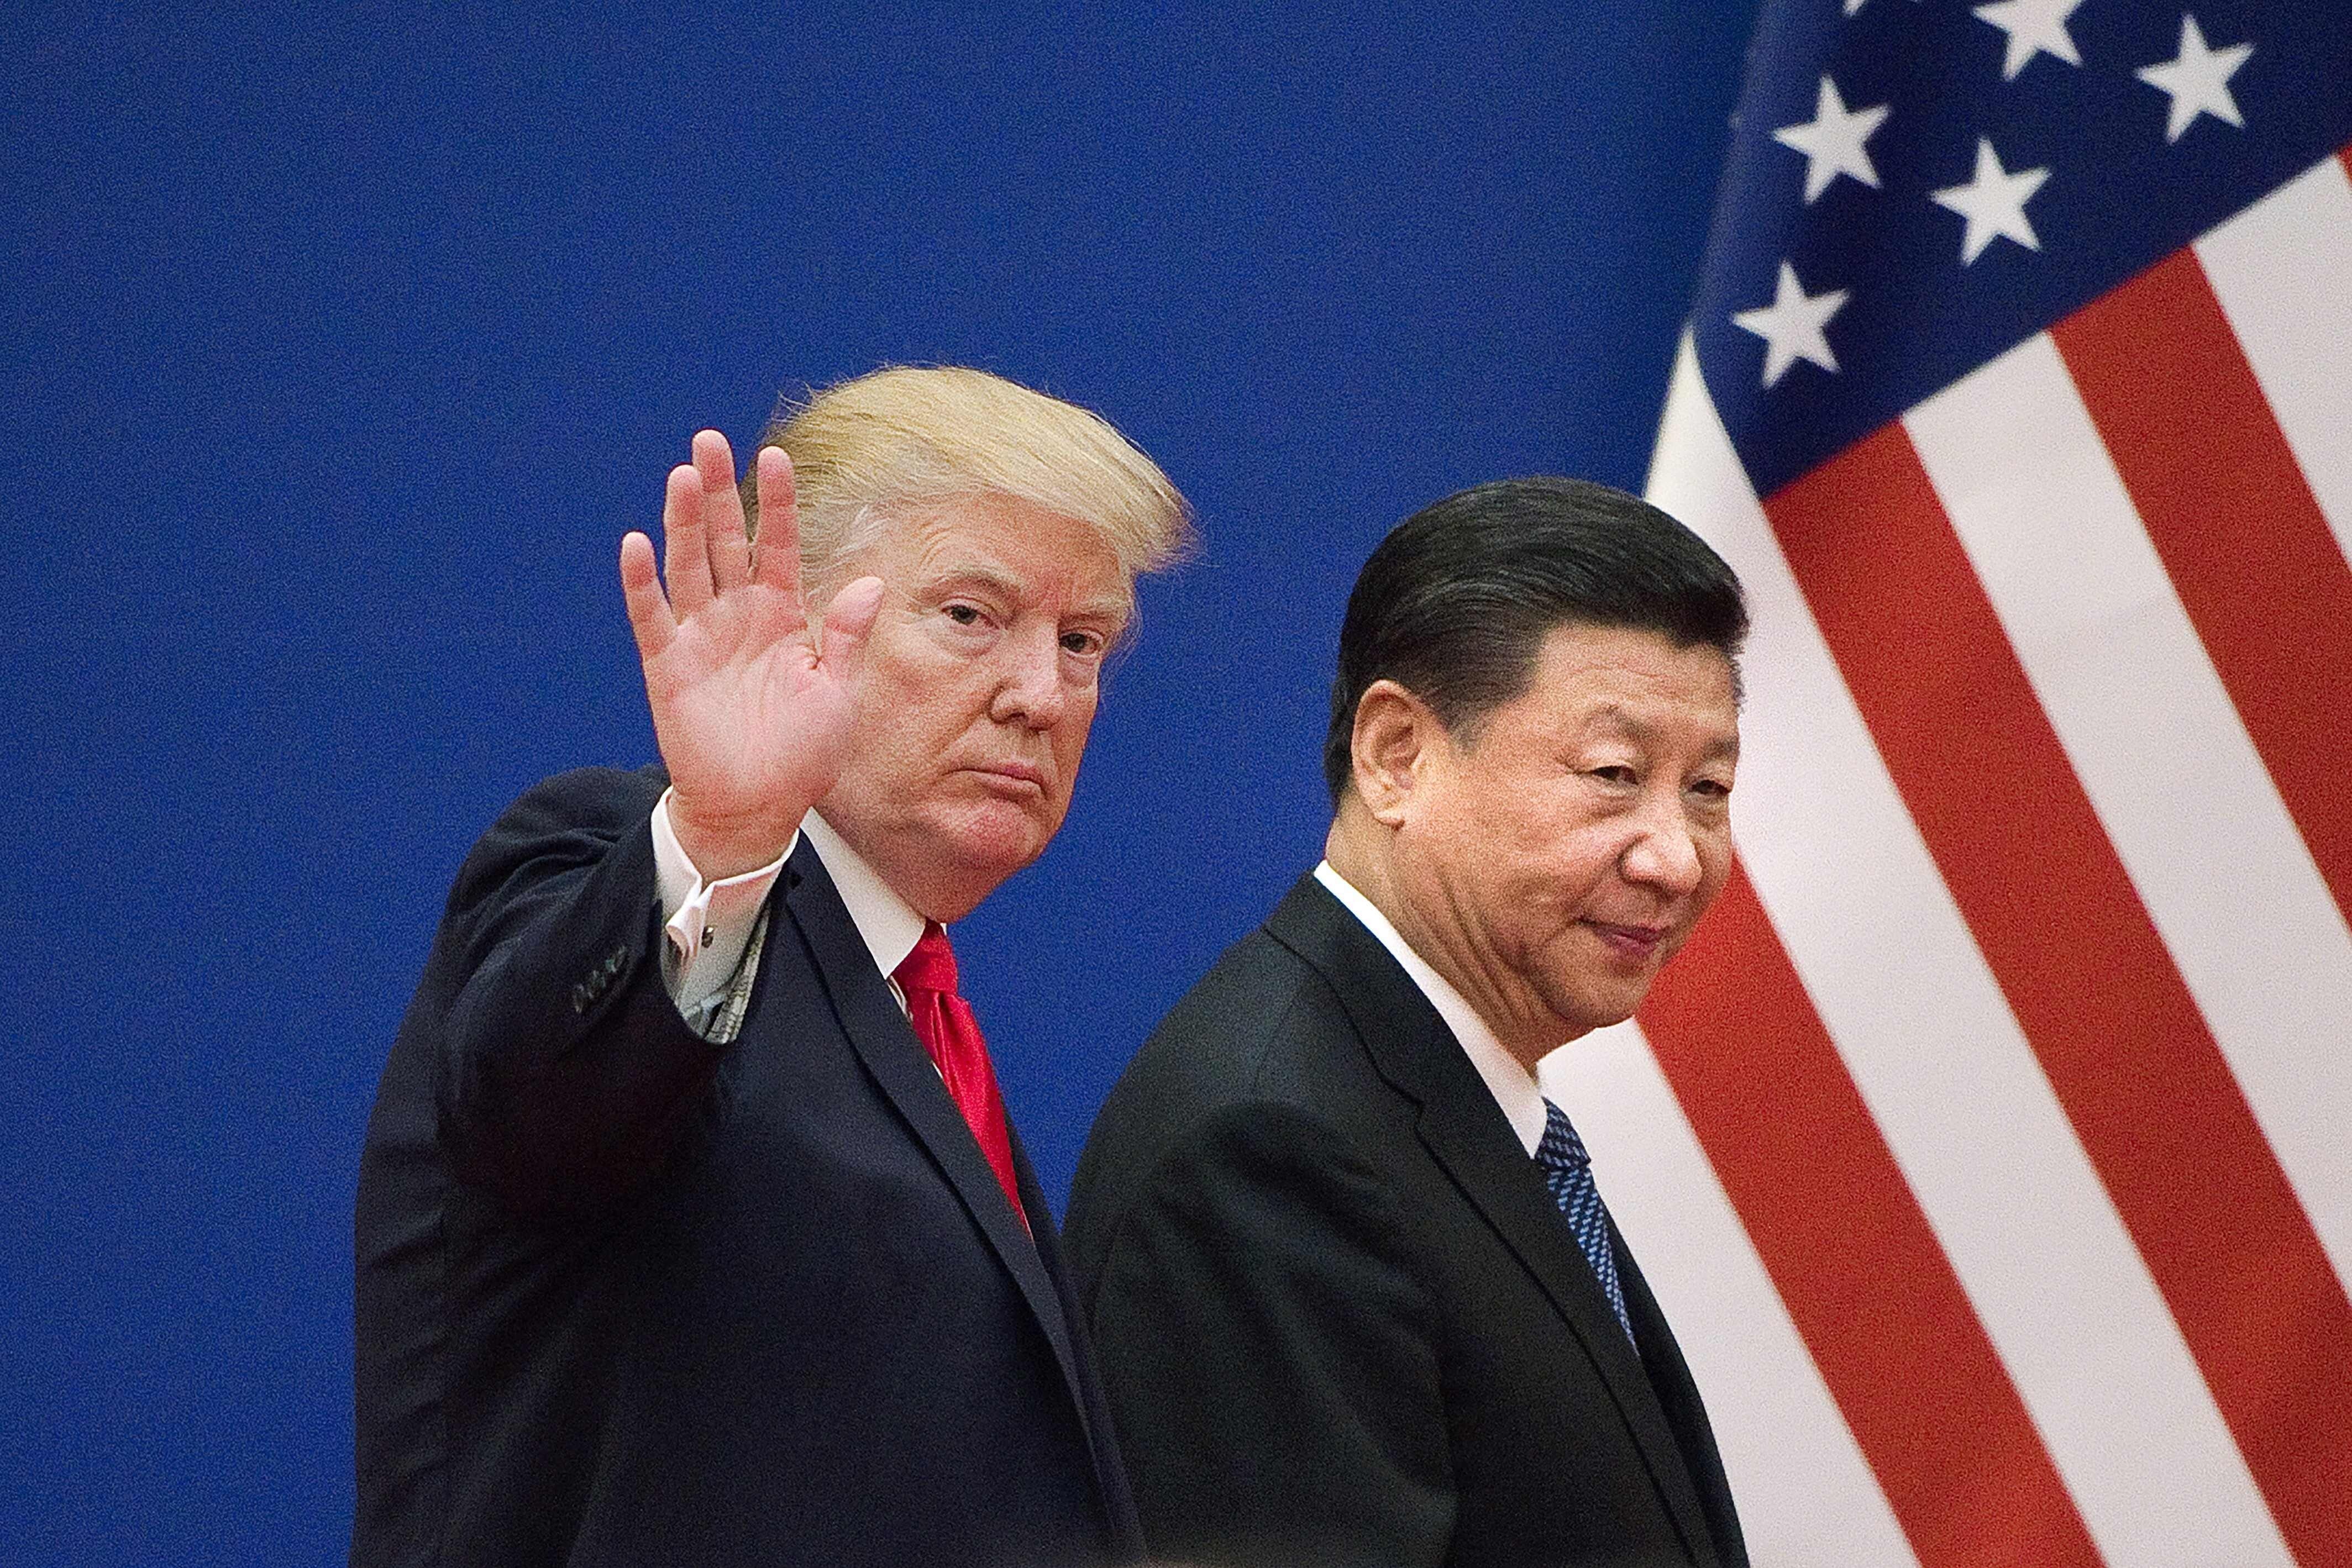 US President Donald Trump and China’s President Xi Jinping in 2017. Photo: AFP